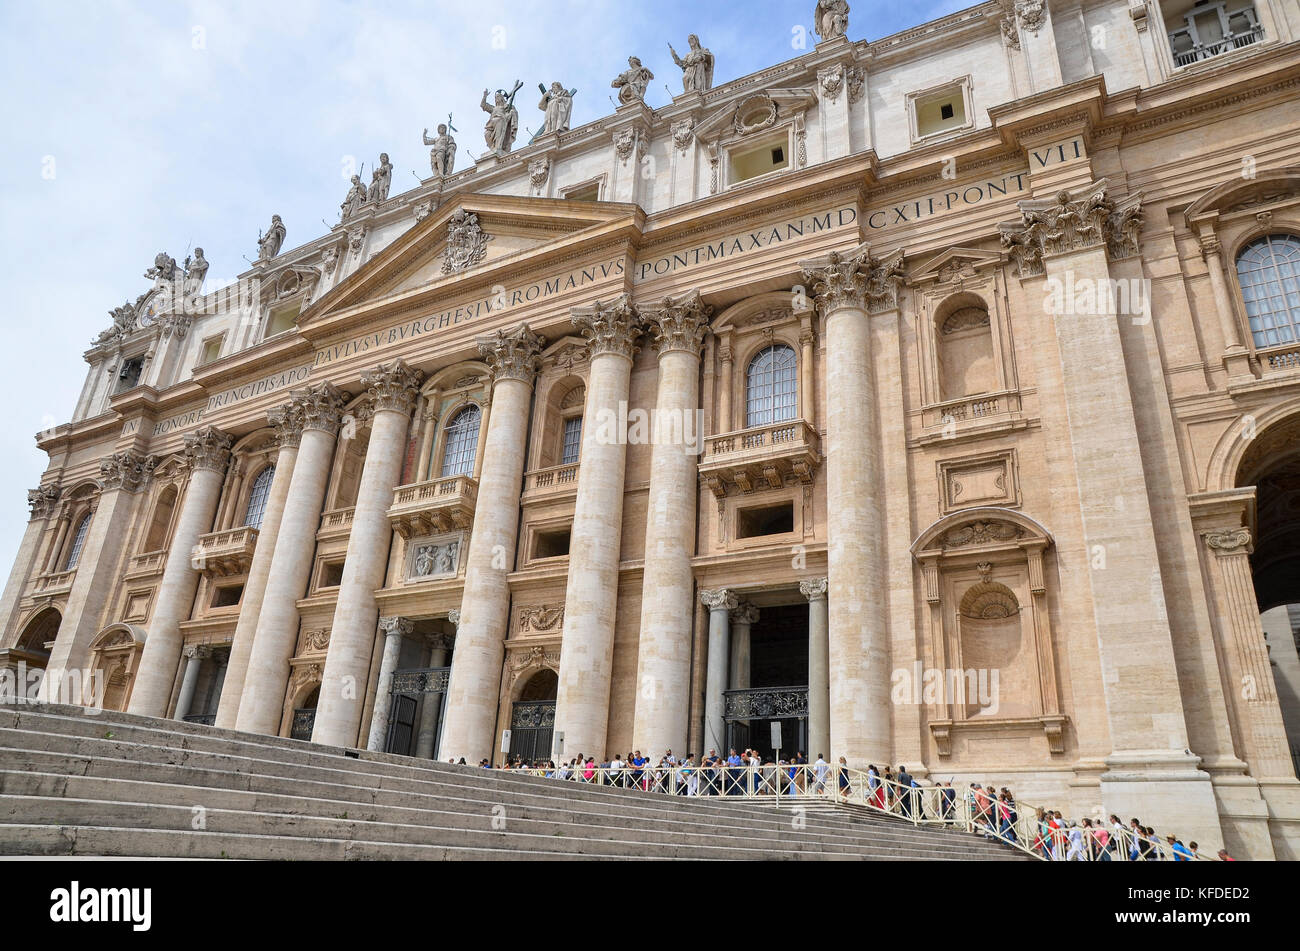 The facade of the historic St Peter's Basilica, at the heart of St Peter's square and the Vatican city in Rome. Stock Photo